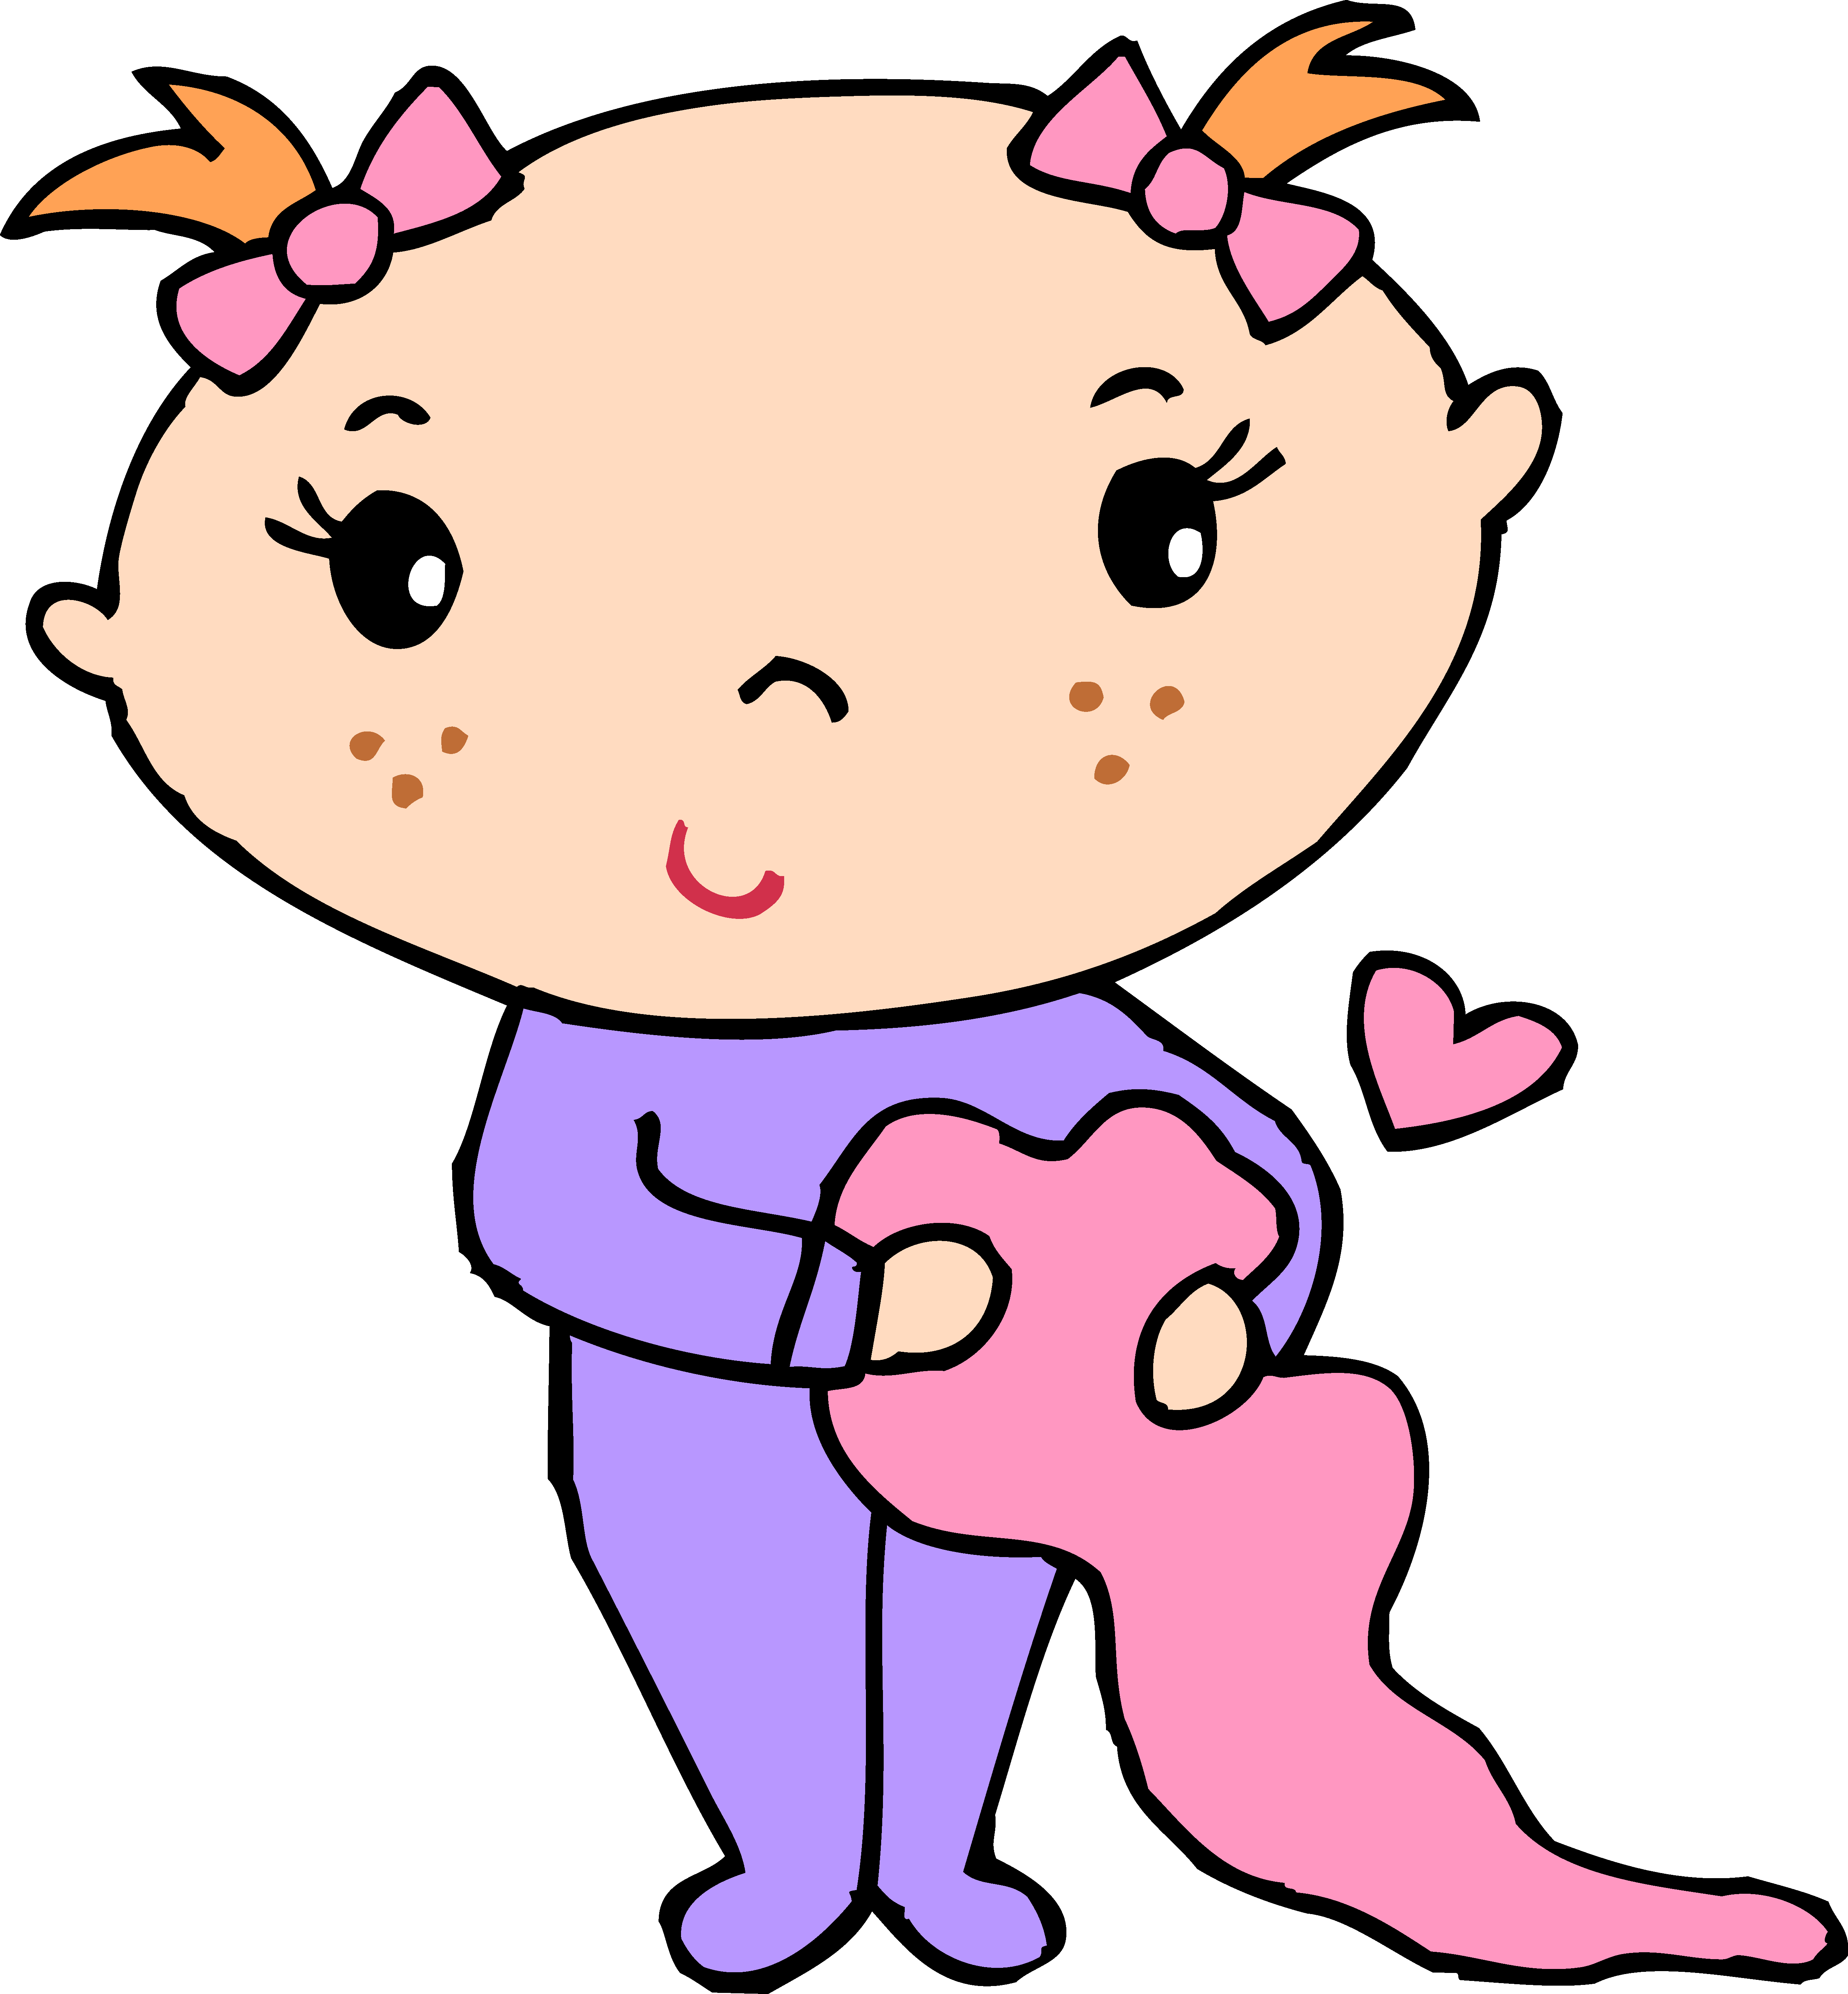 Baby girl girl clipart free clipart images - Clipartix